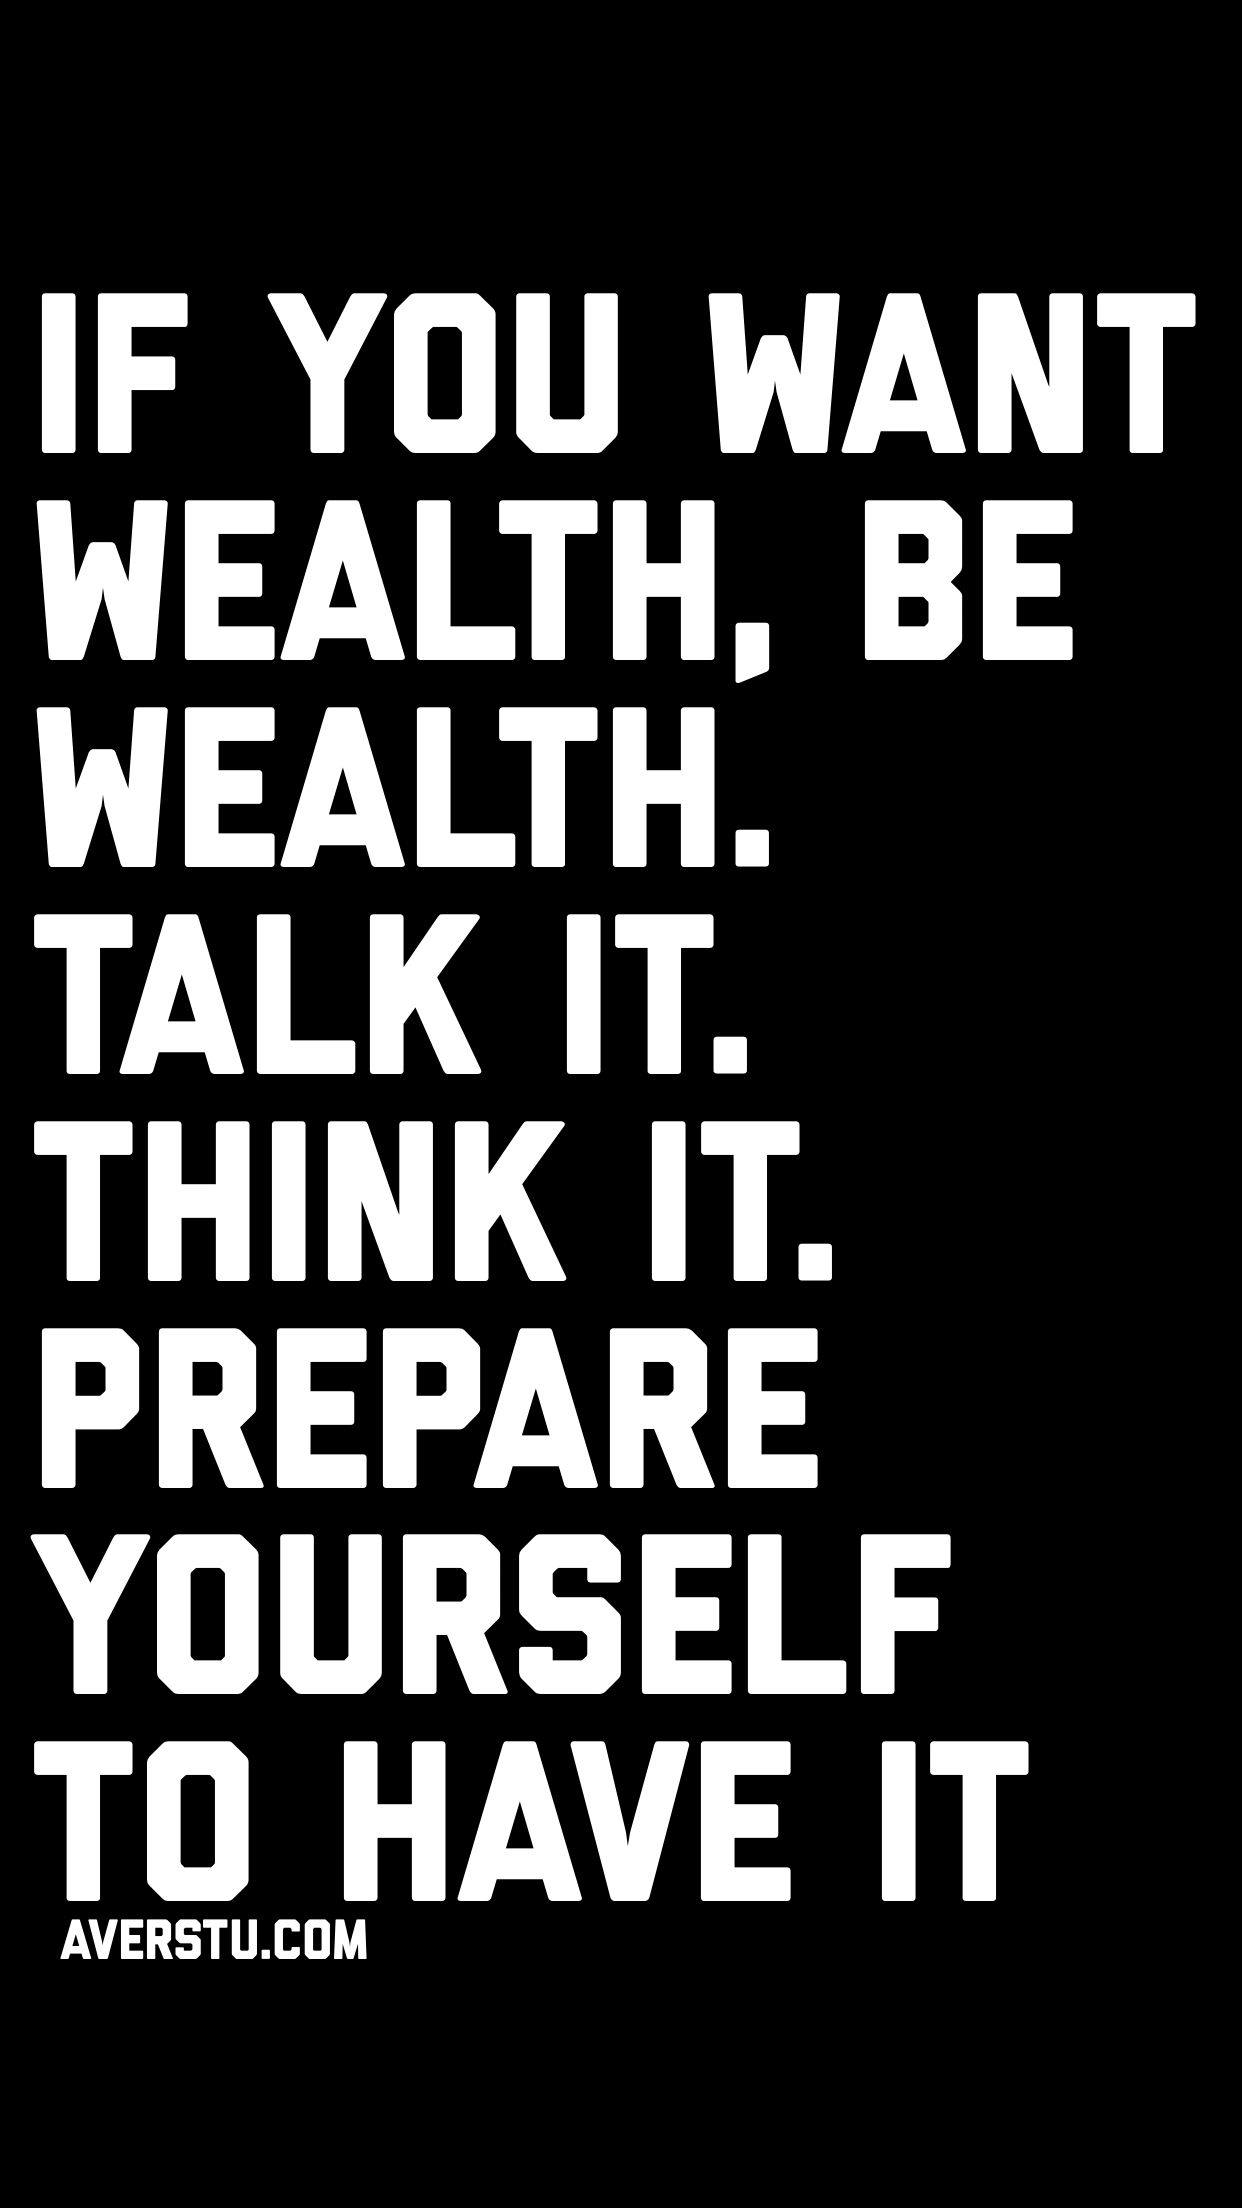 if you want wealth, be wealth. talk it think it., prepare yourself to have it